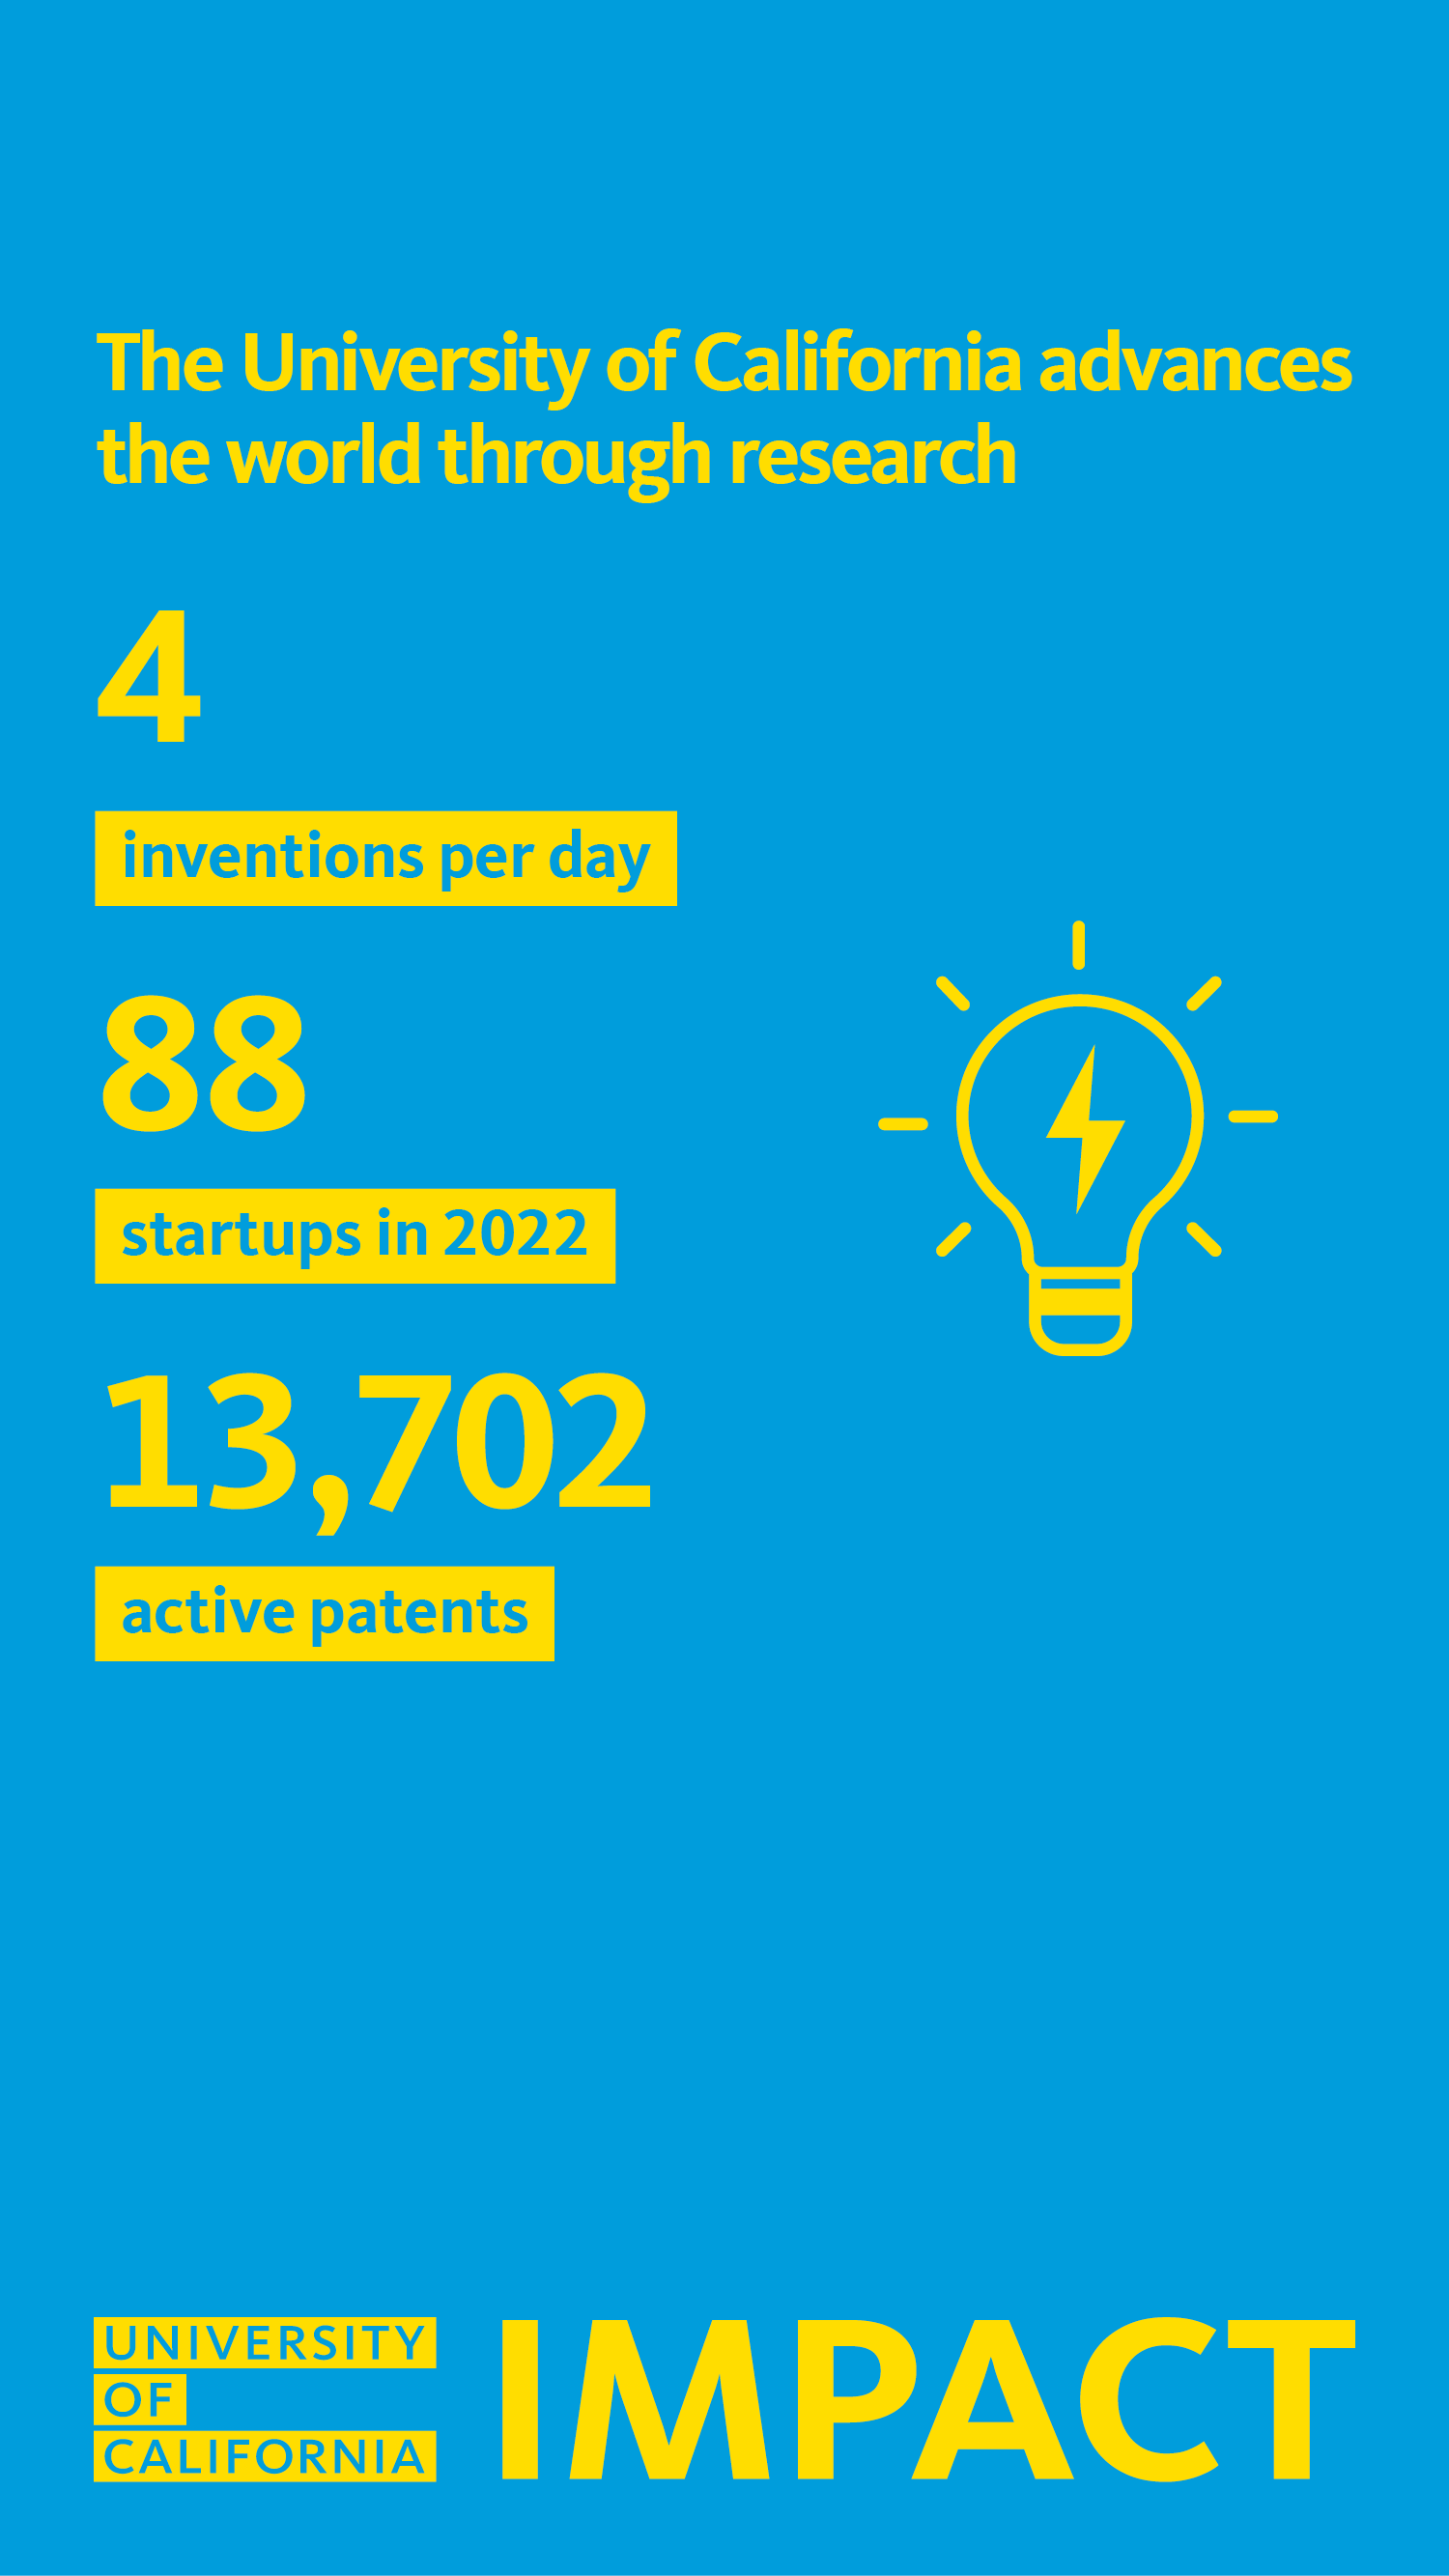 Yellow text on blue background reading: The University of California advances the world through research. 4 inventions per day. 88 startups in 2022. 13,702 active patents.